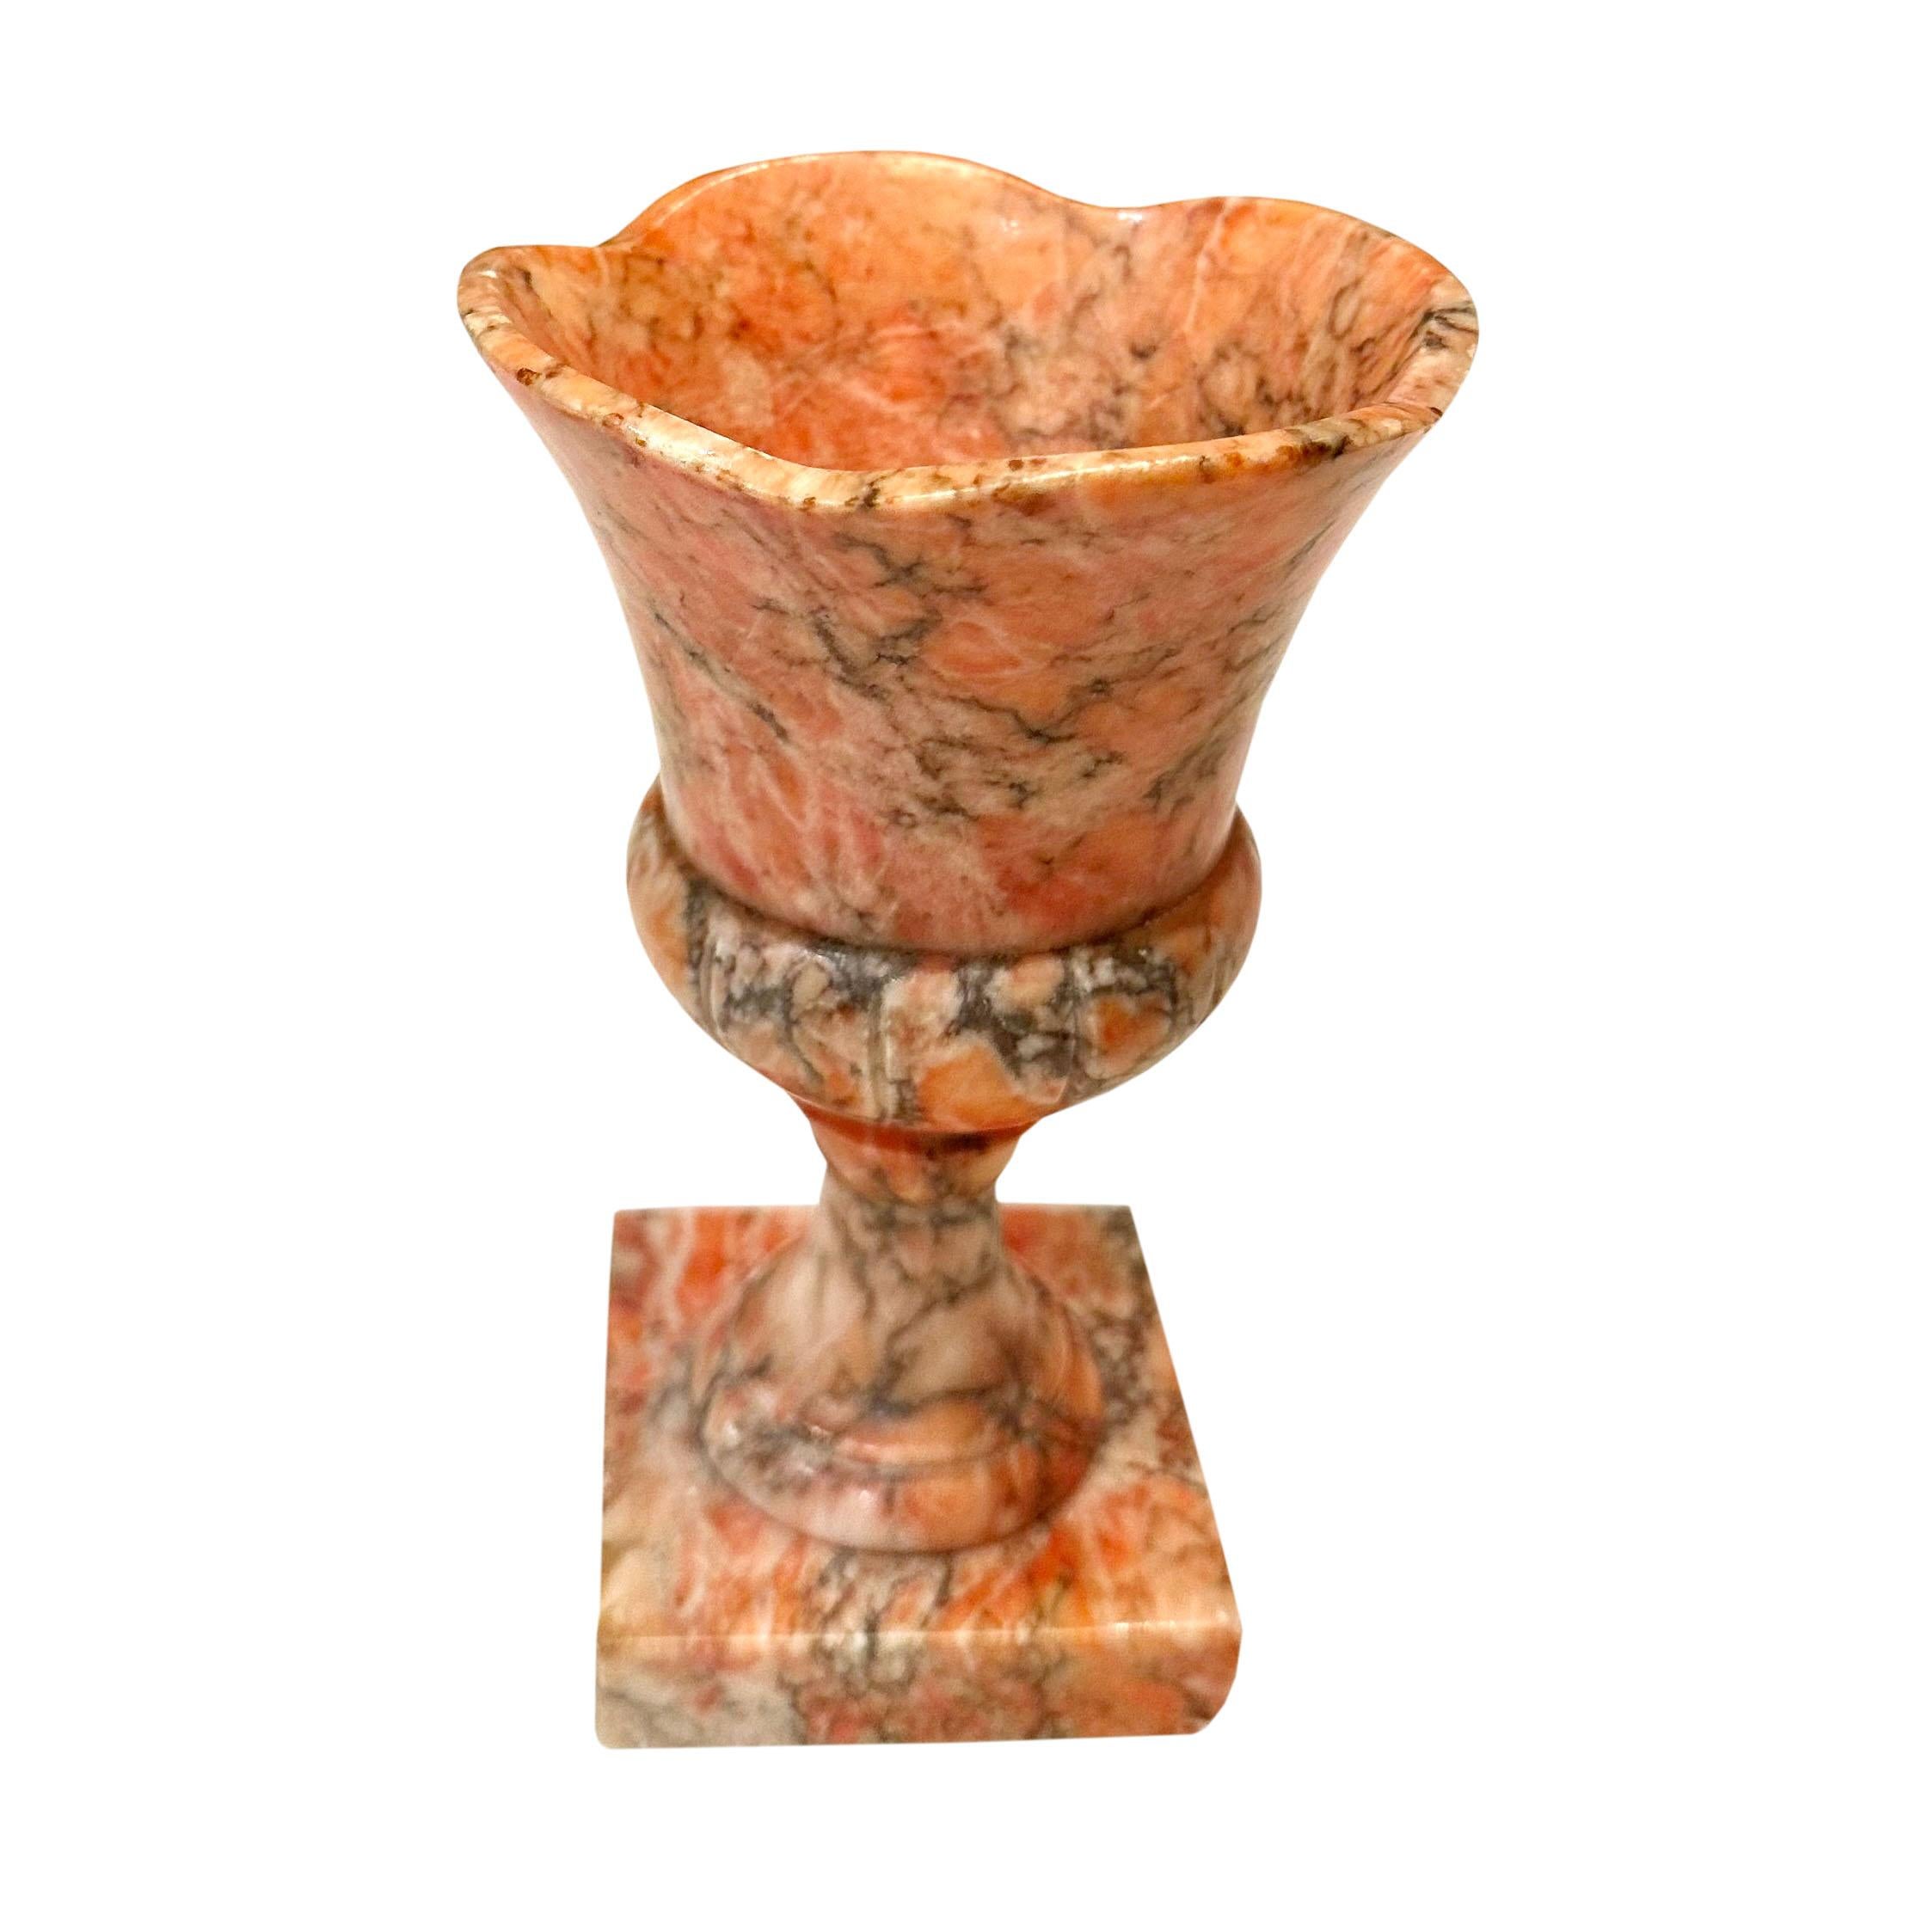 A lovely peach colored marble vase from Italy in the shaped of an urn with a ruffled rim on a square base. Circa 1940s.